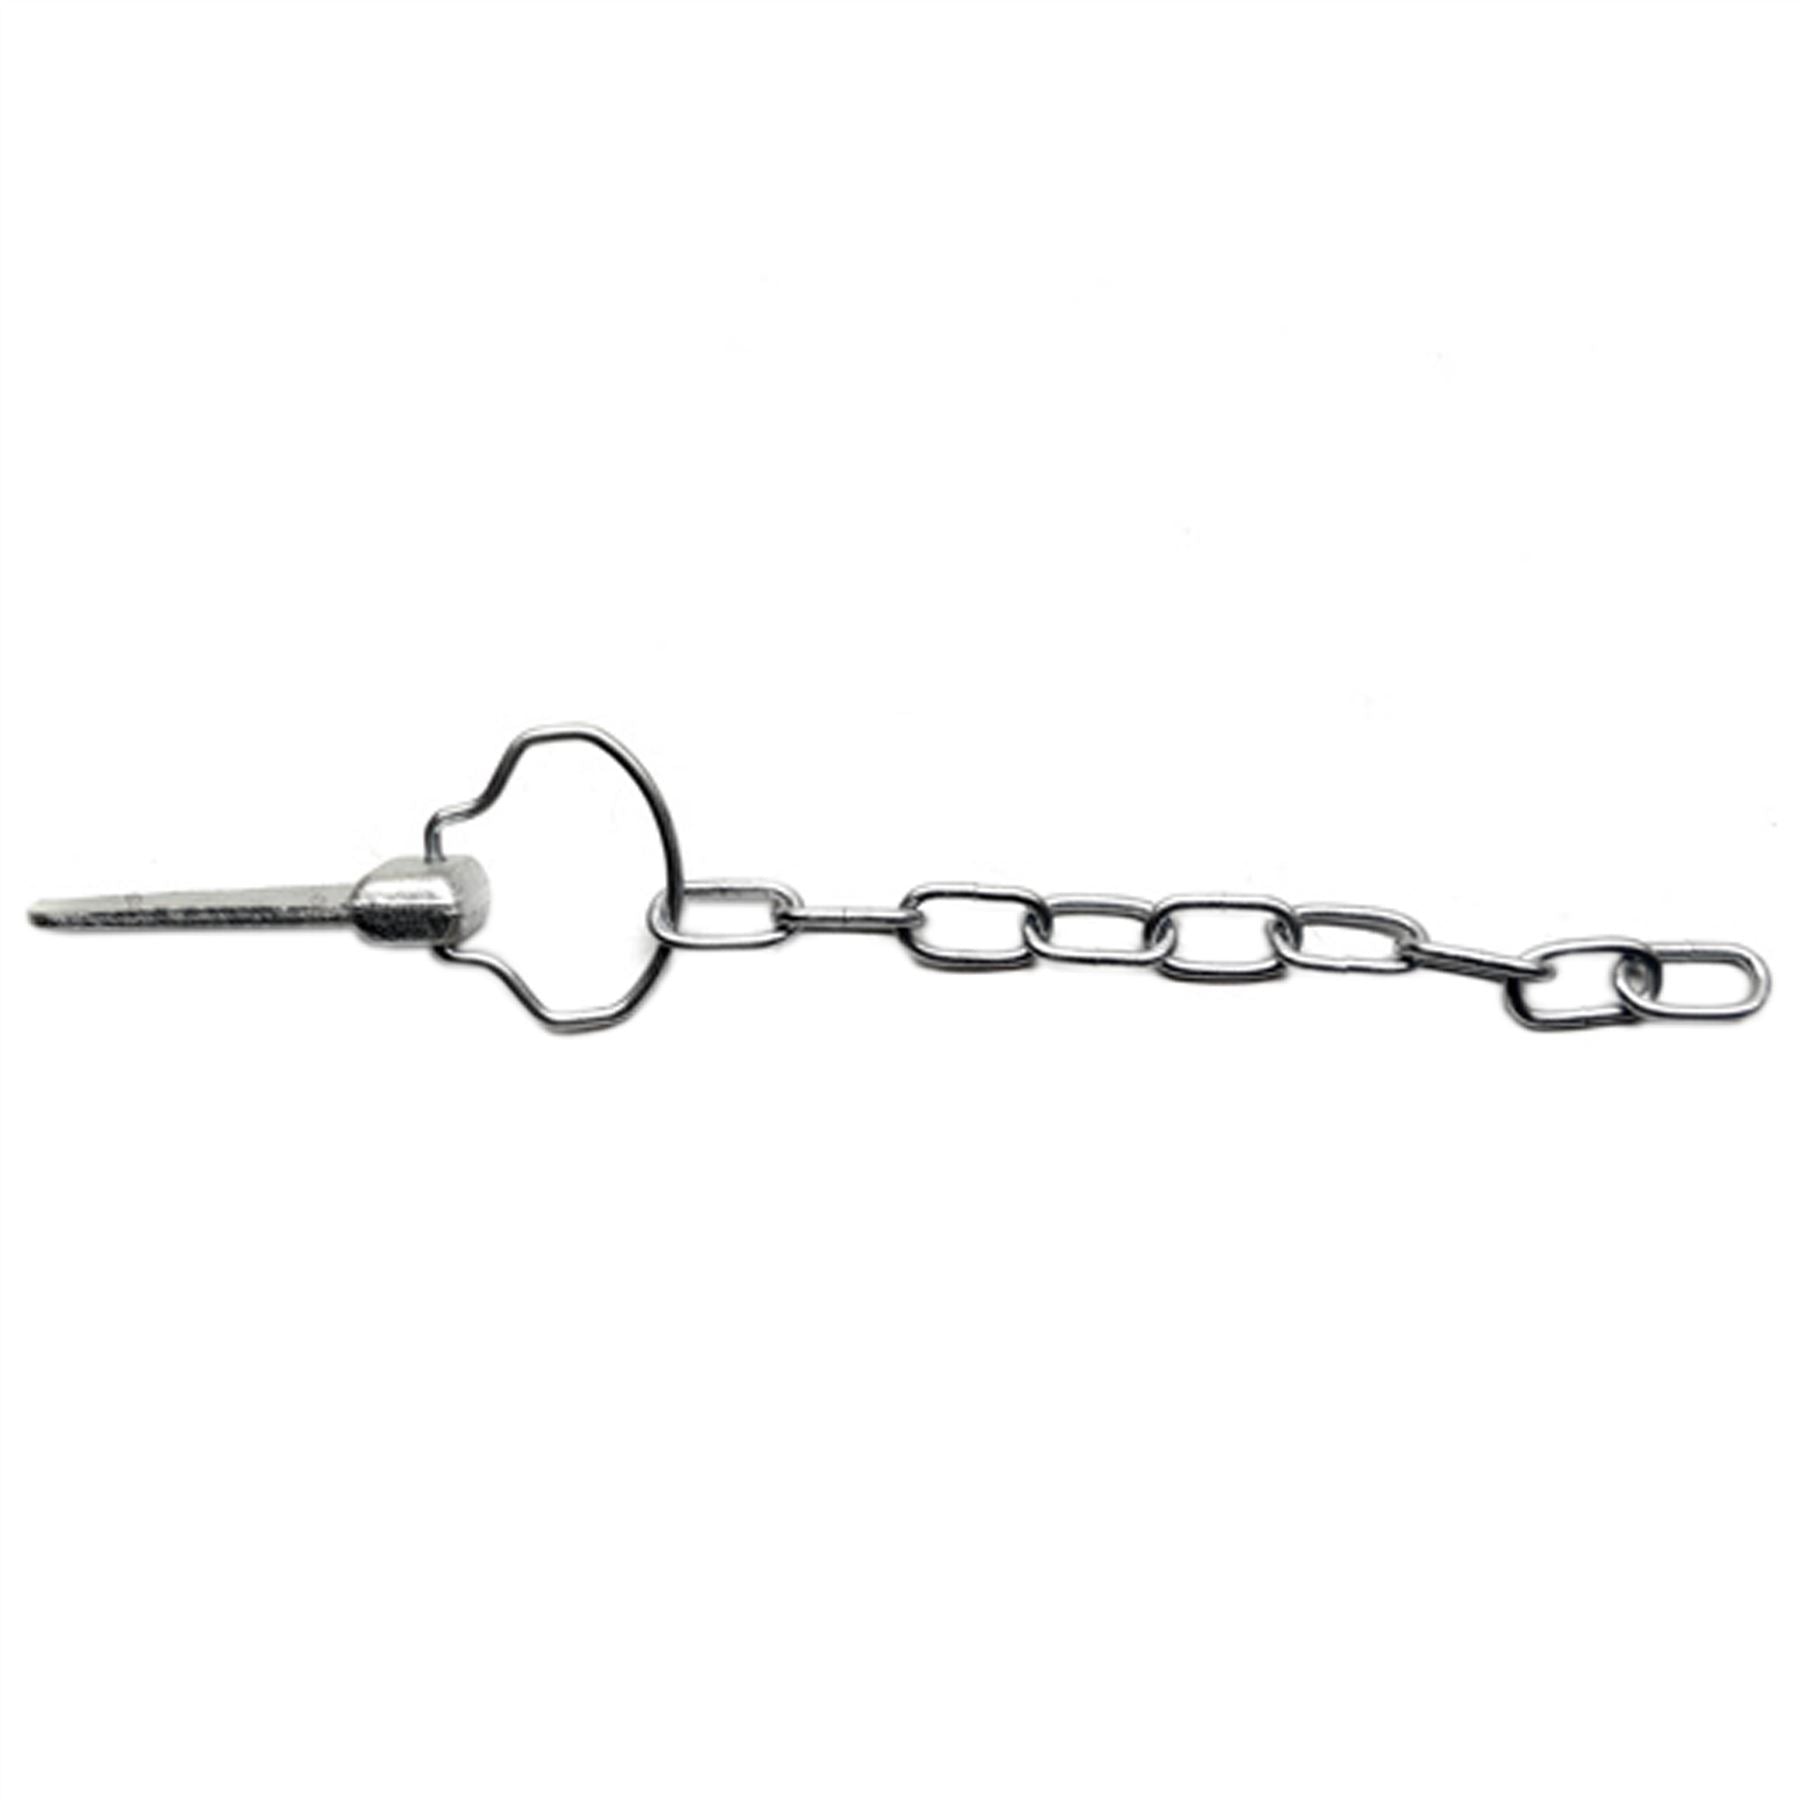 Zinc Plated Flat Cotter Spring Ring and Chain